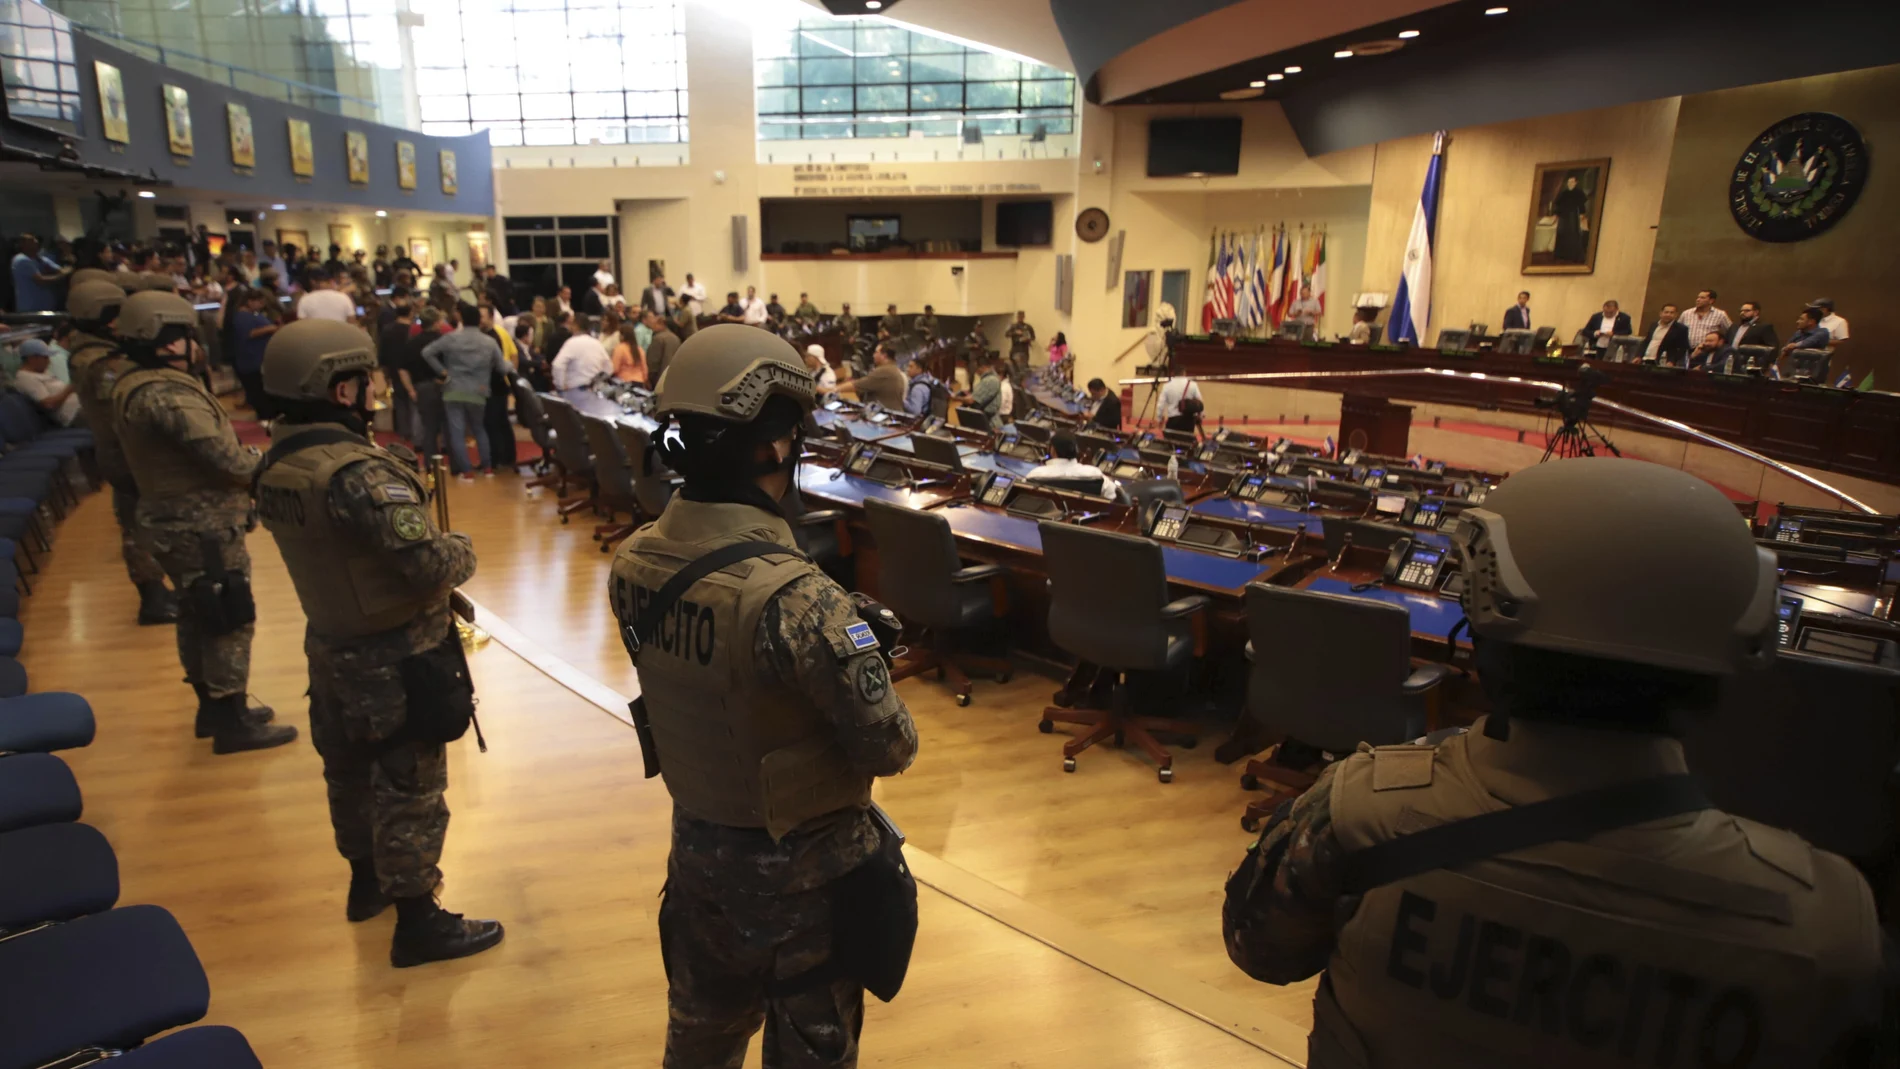 Armed Special Forces soldiers of the Salvadoran Army, following orders of President Nayib Bukele, enter congress upon the arrival of lawmakers, in San Salvador, El Salvador, Sunday, Feb. 9, 2020. Bukele has called on supporters to converge around the country's parliament after legislators refused to gather to vote on a $109 million loan to better equip the country's security forces. Top commanders of the country's police and military have expressed allegiance to the president during the standoff, while positioning security forces in and around the legislative building. (AP Photo/Salvador Melendez)